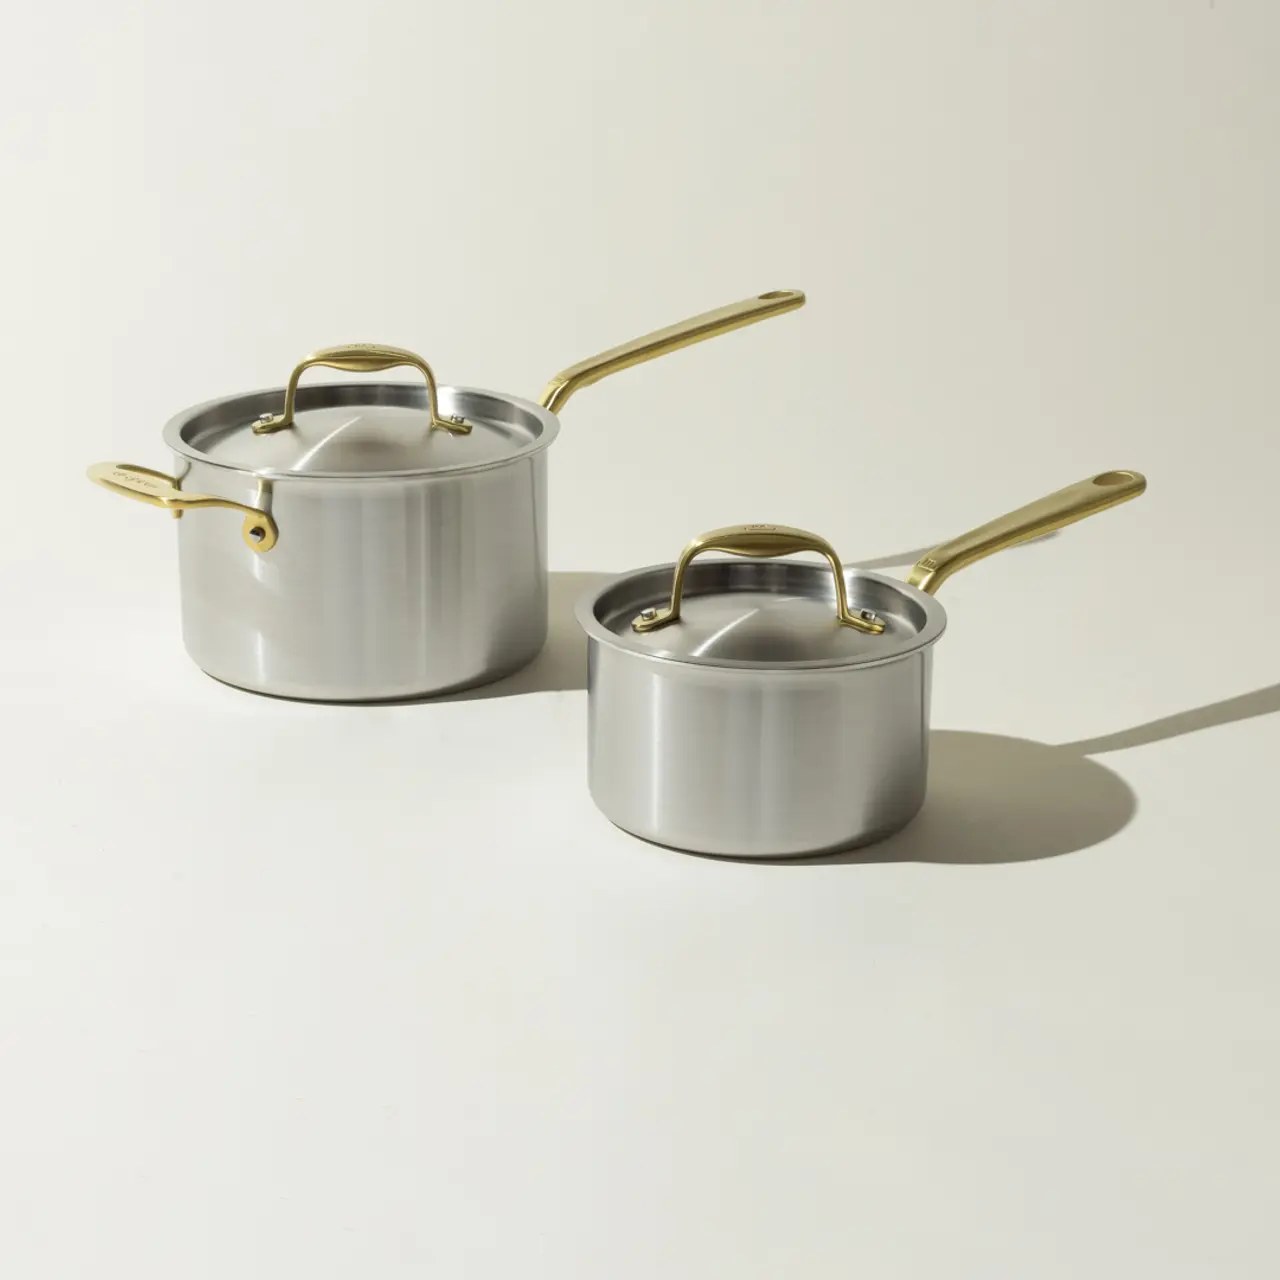 Two silver saucepans with golden handles cast soft shadows on a light background.